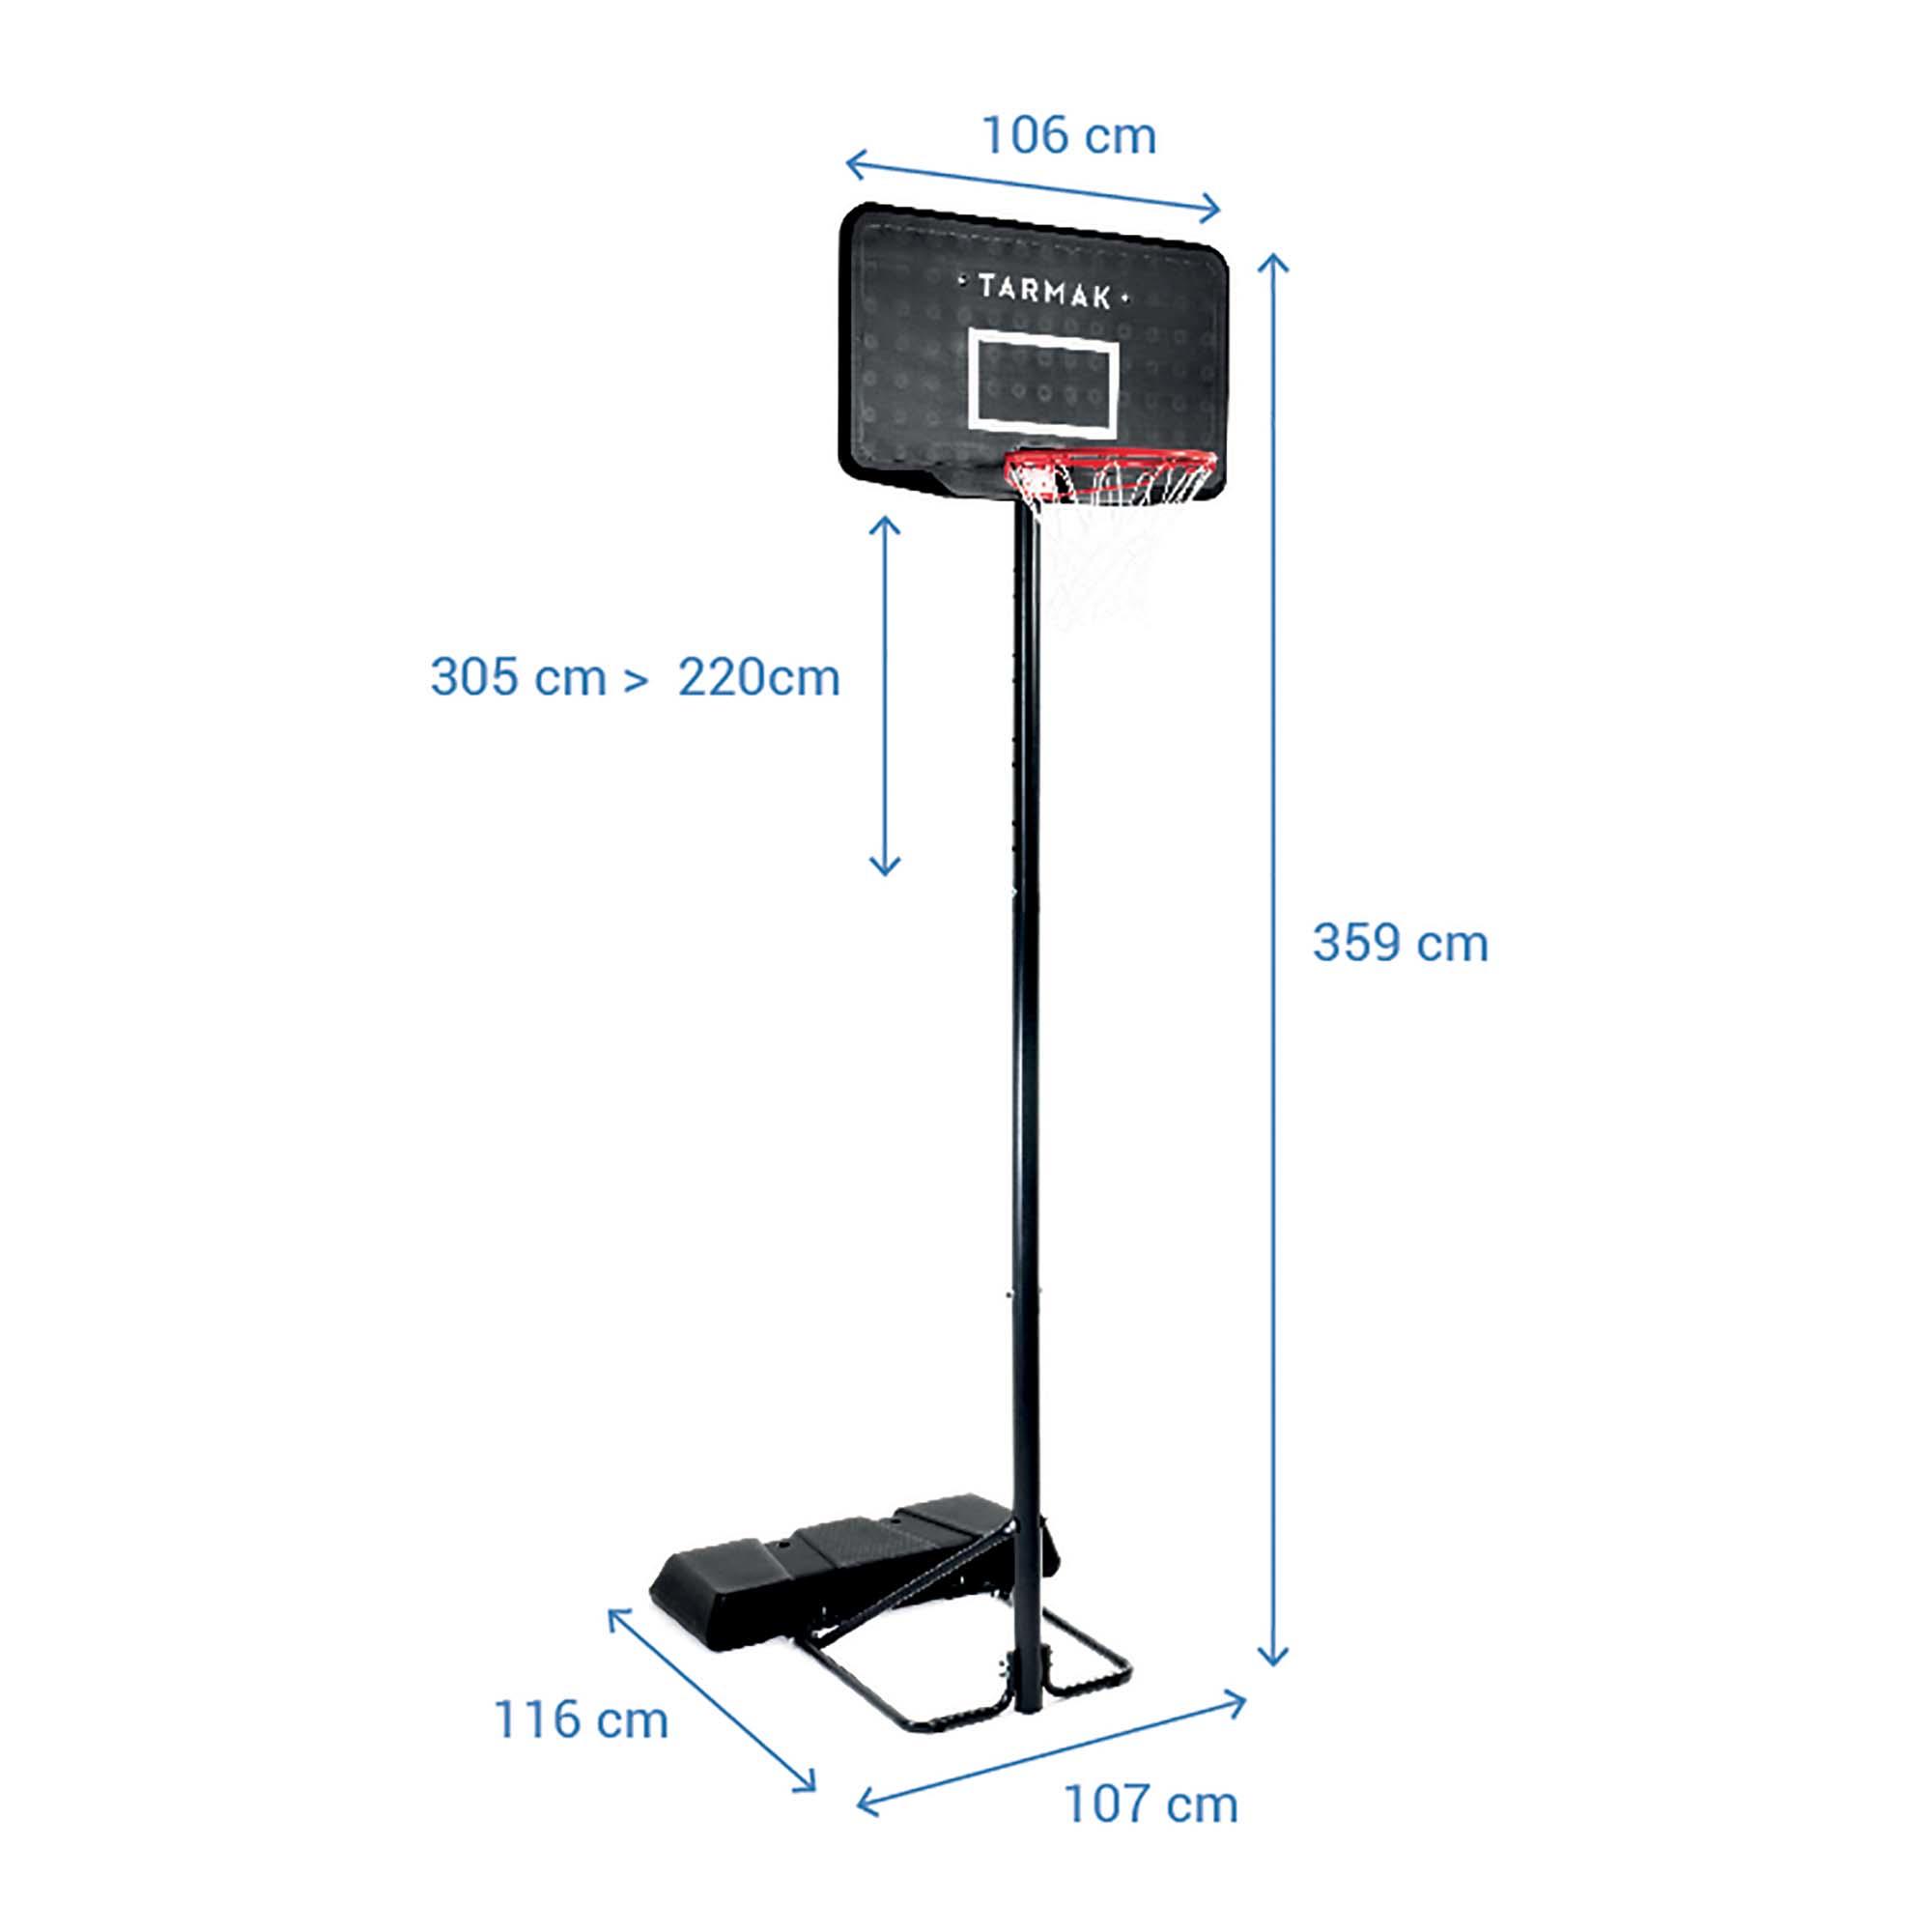 Basketball Hoop with Adjustable Stand (from 2.20 to 3.05m) B100 - Black 5/12